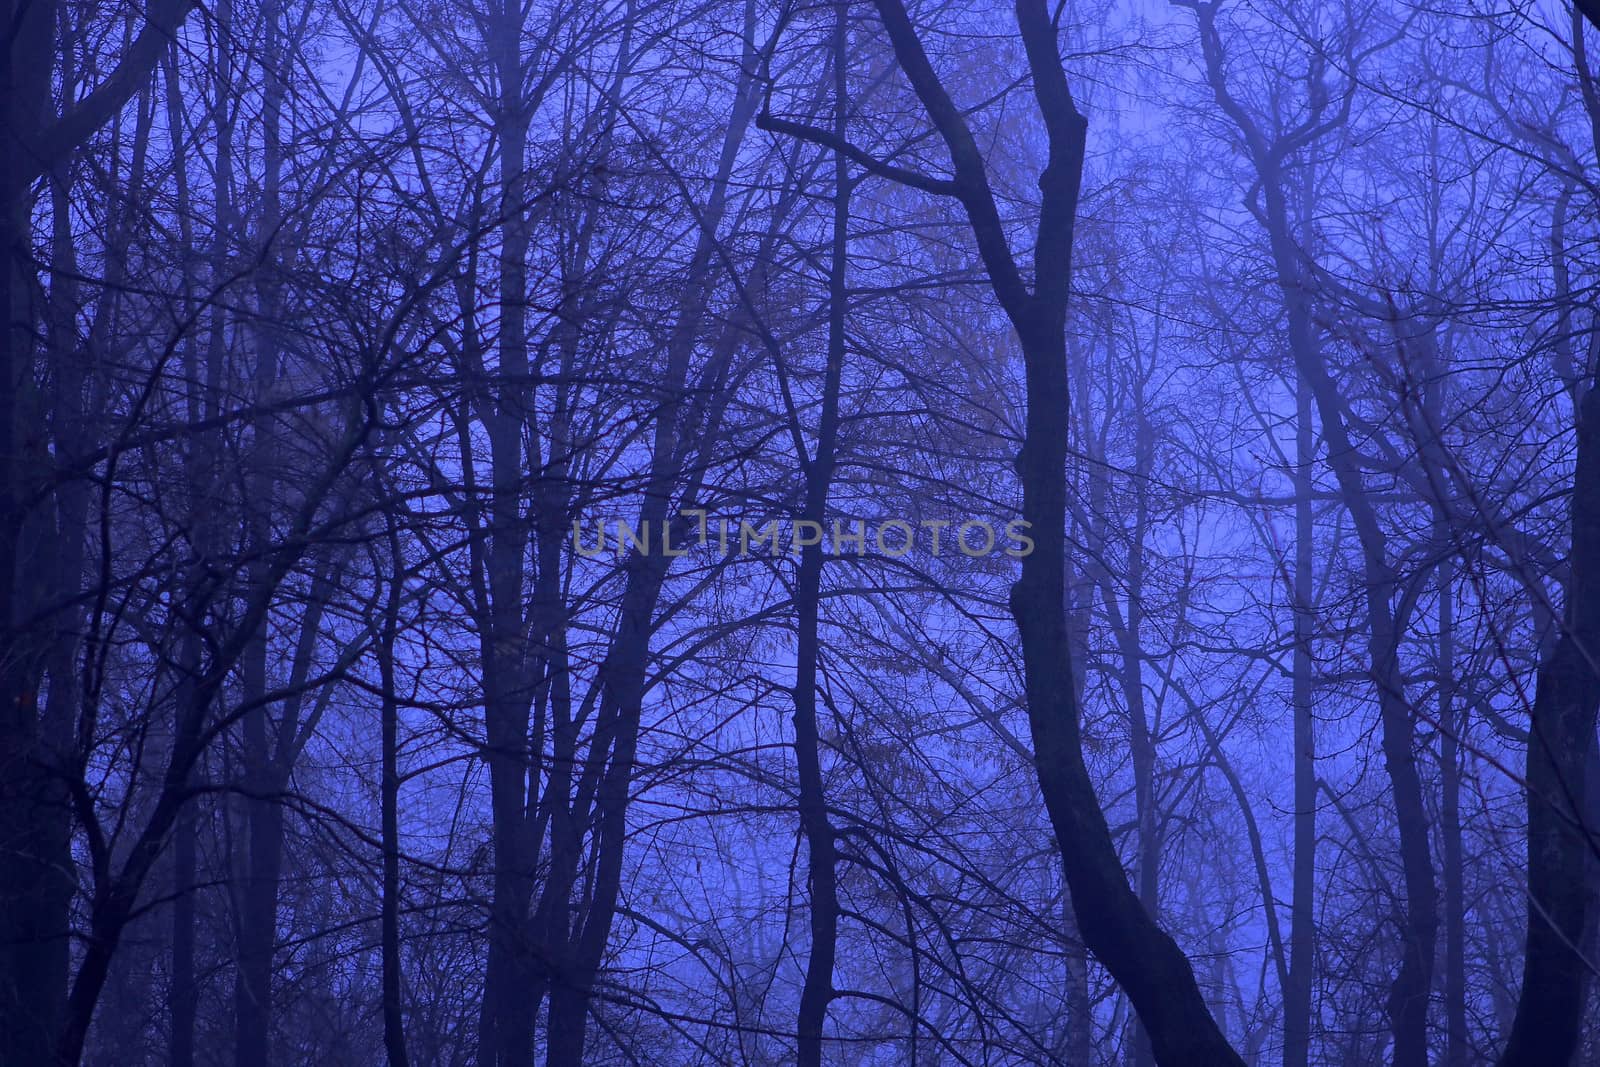 Blue night forest by cococinema